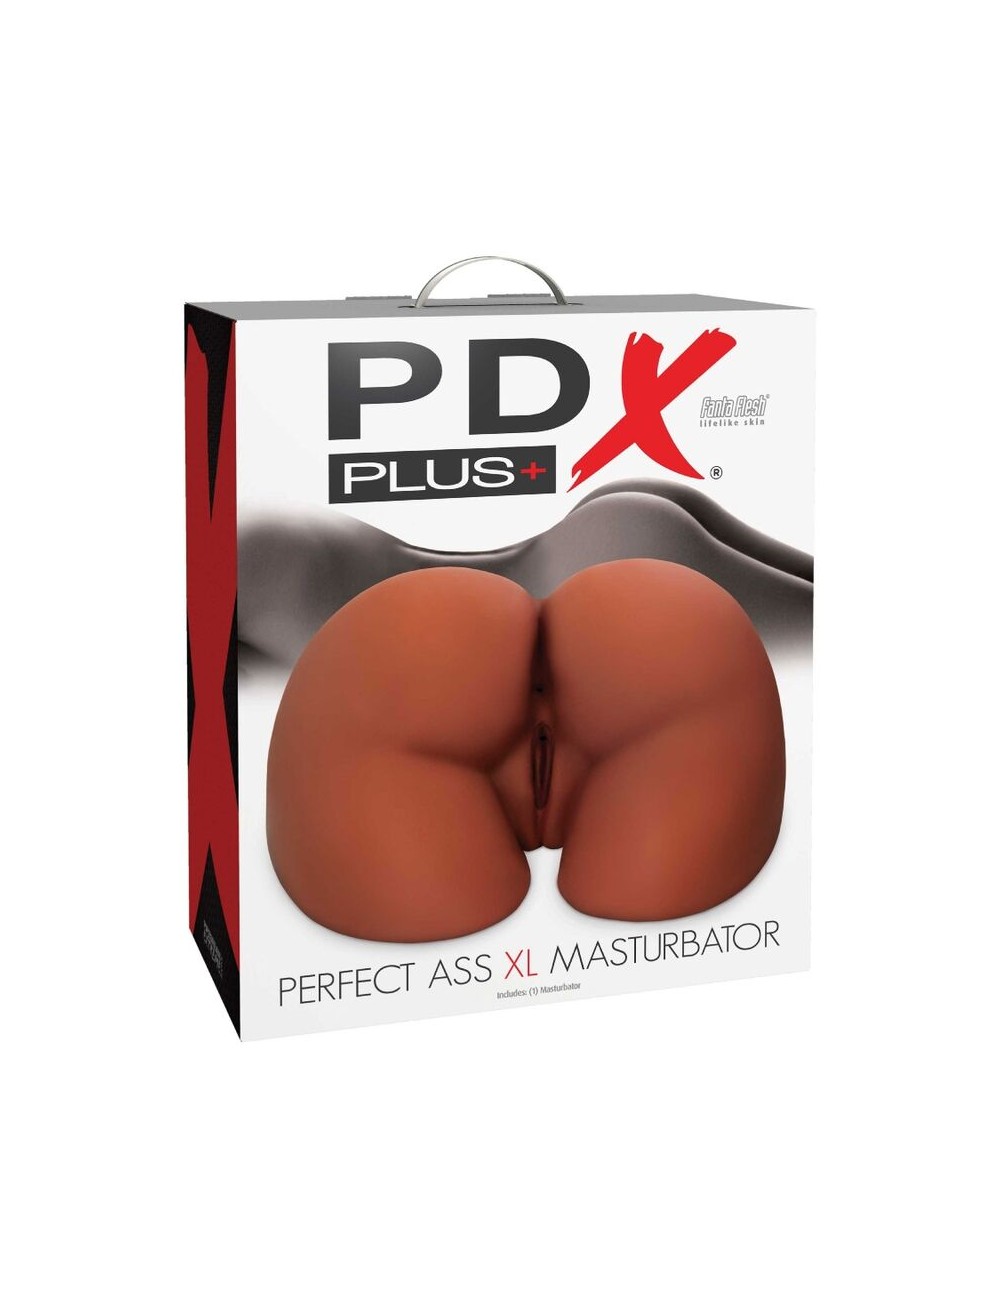 PDX PLUS - PERFECT ASS XL DOUBLE ENTRY BROWN MASTURBATOR